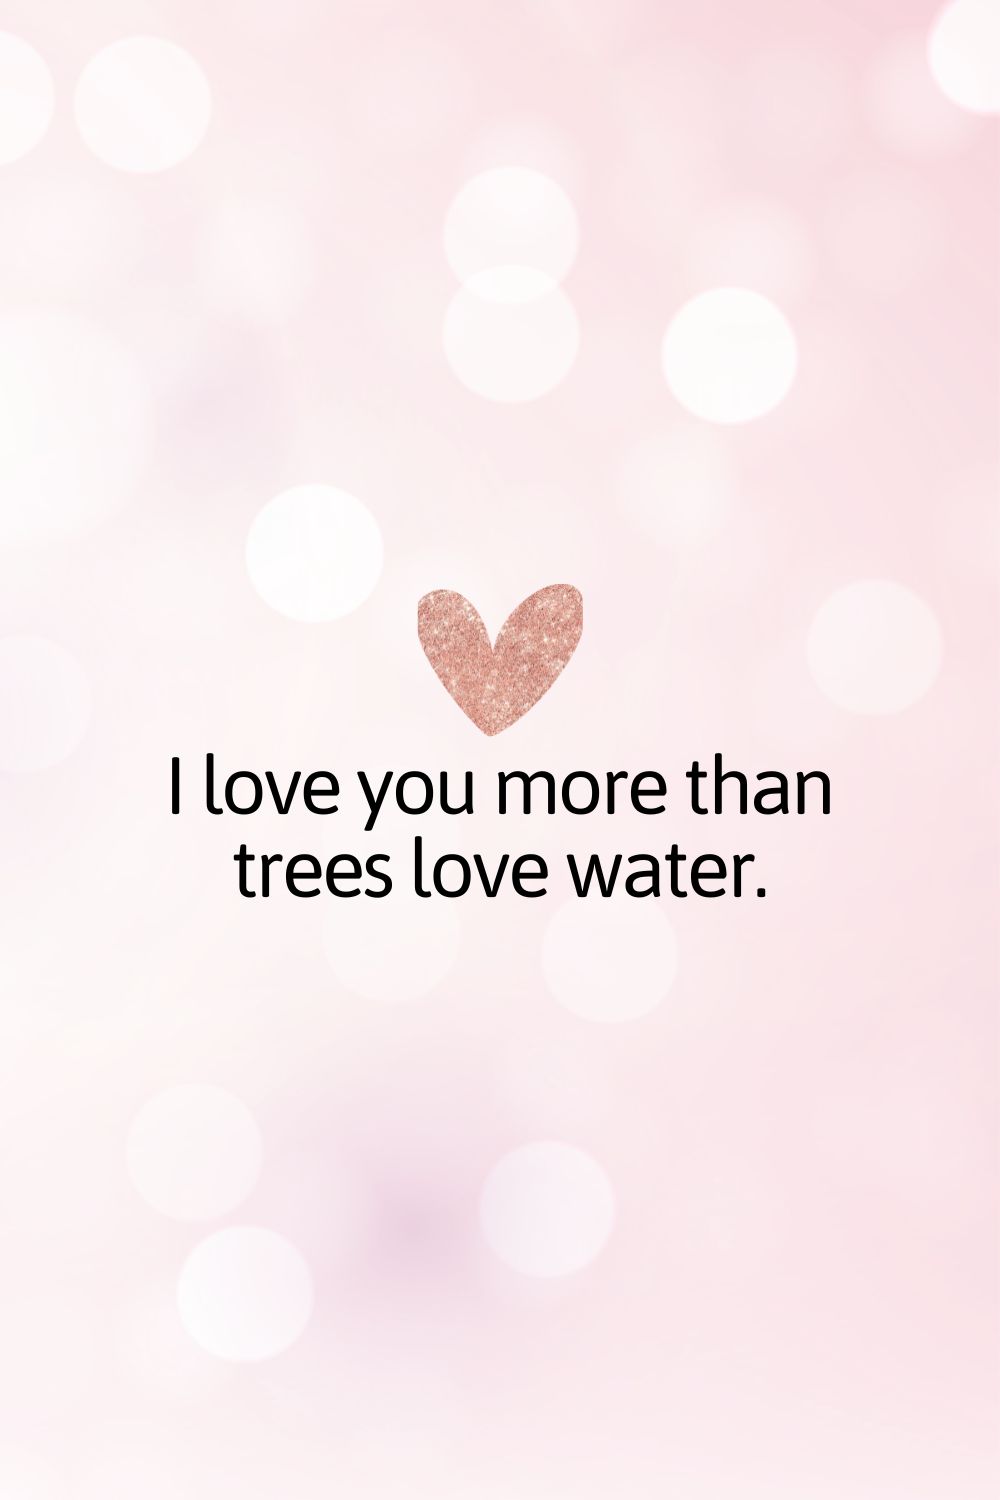 I love you more than trees love water